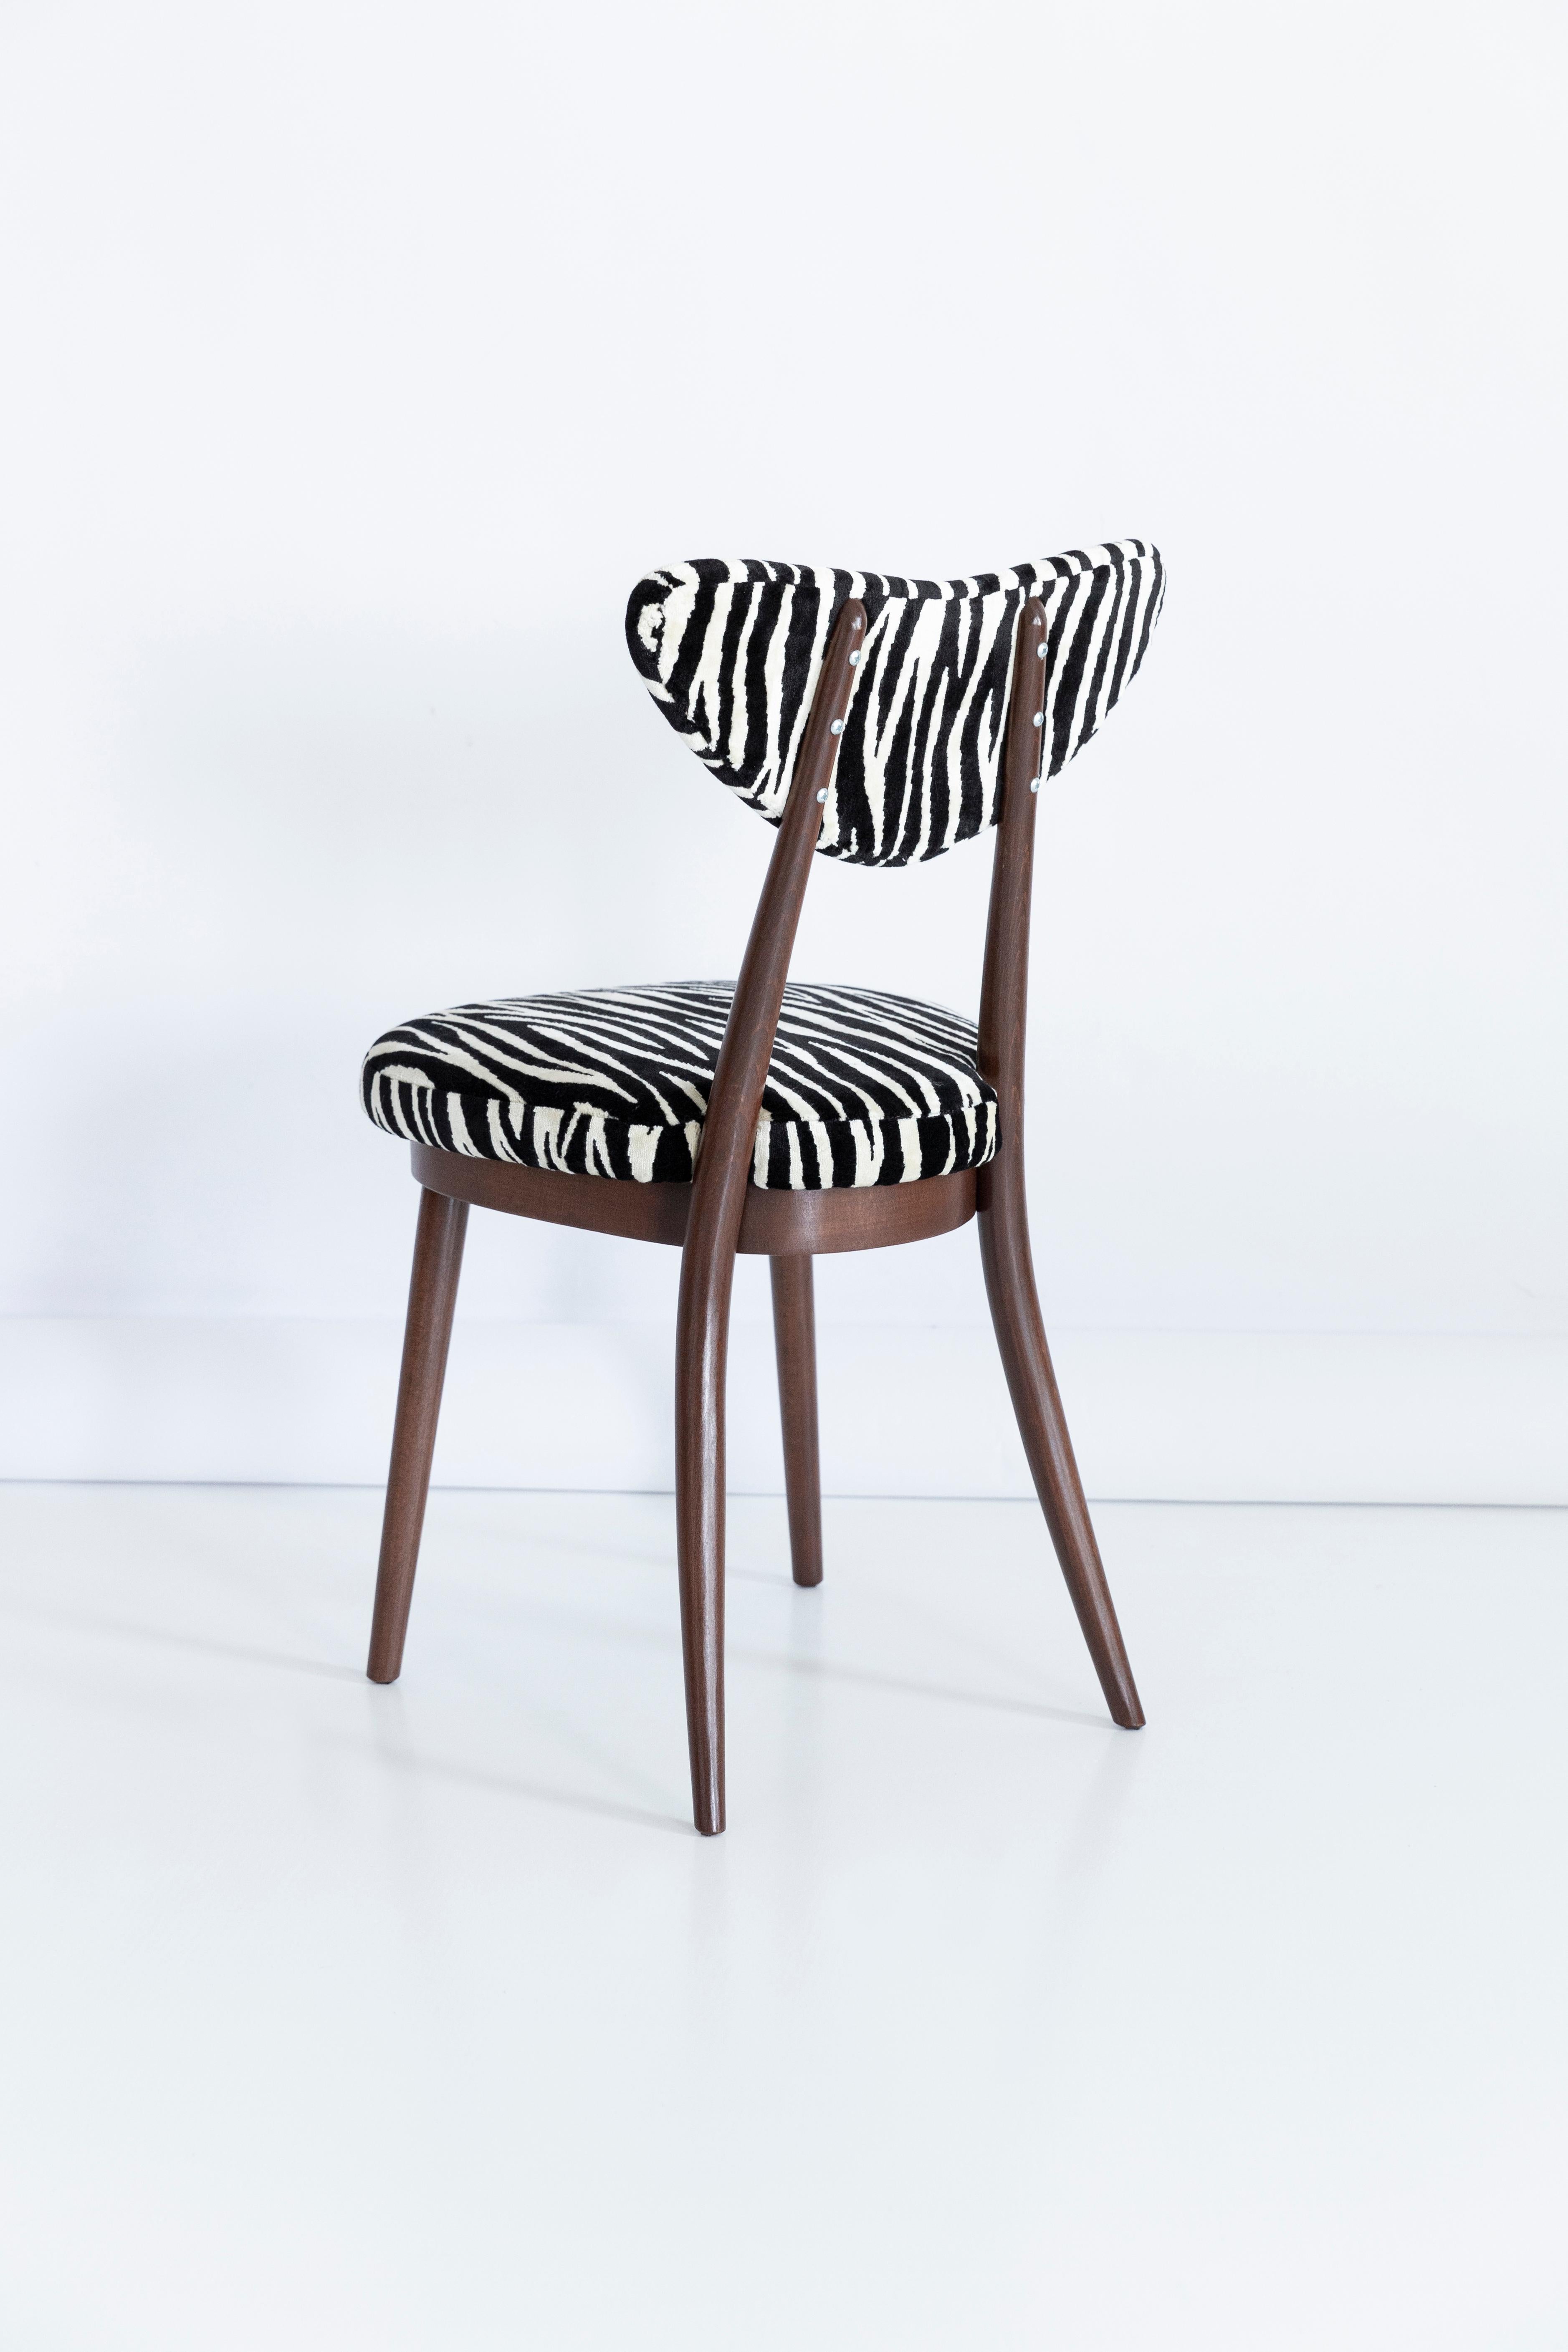 Set of Four Midcentury Zebra Black and White Heart Chairs, Poland, 1960s In Excellent Condition For Sale In 05-080 Hornowek, PL